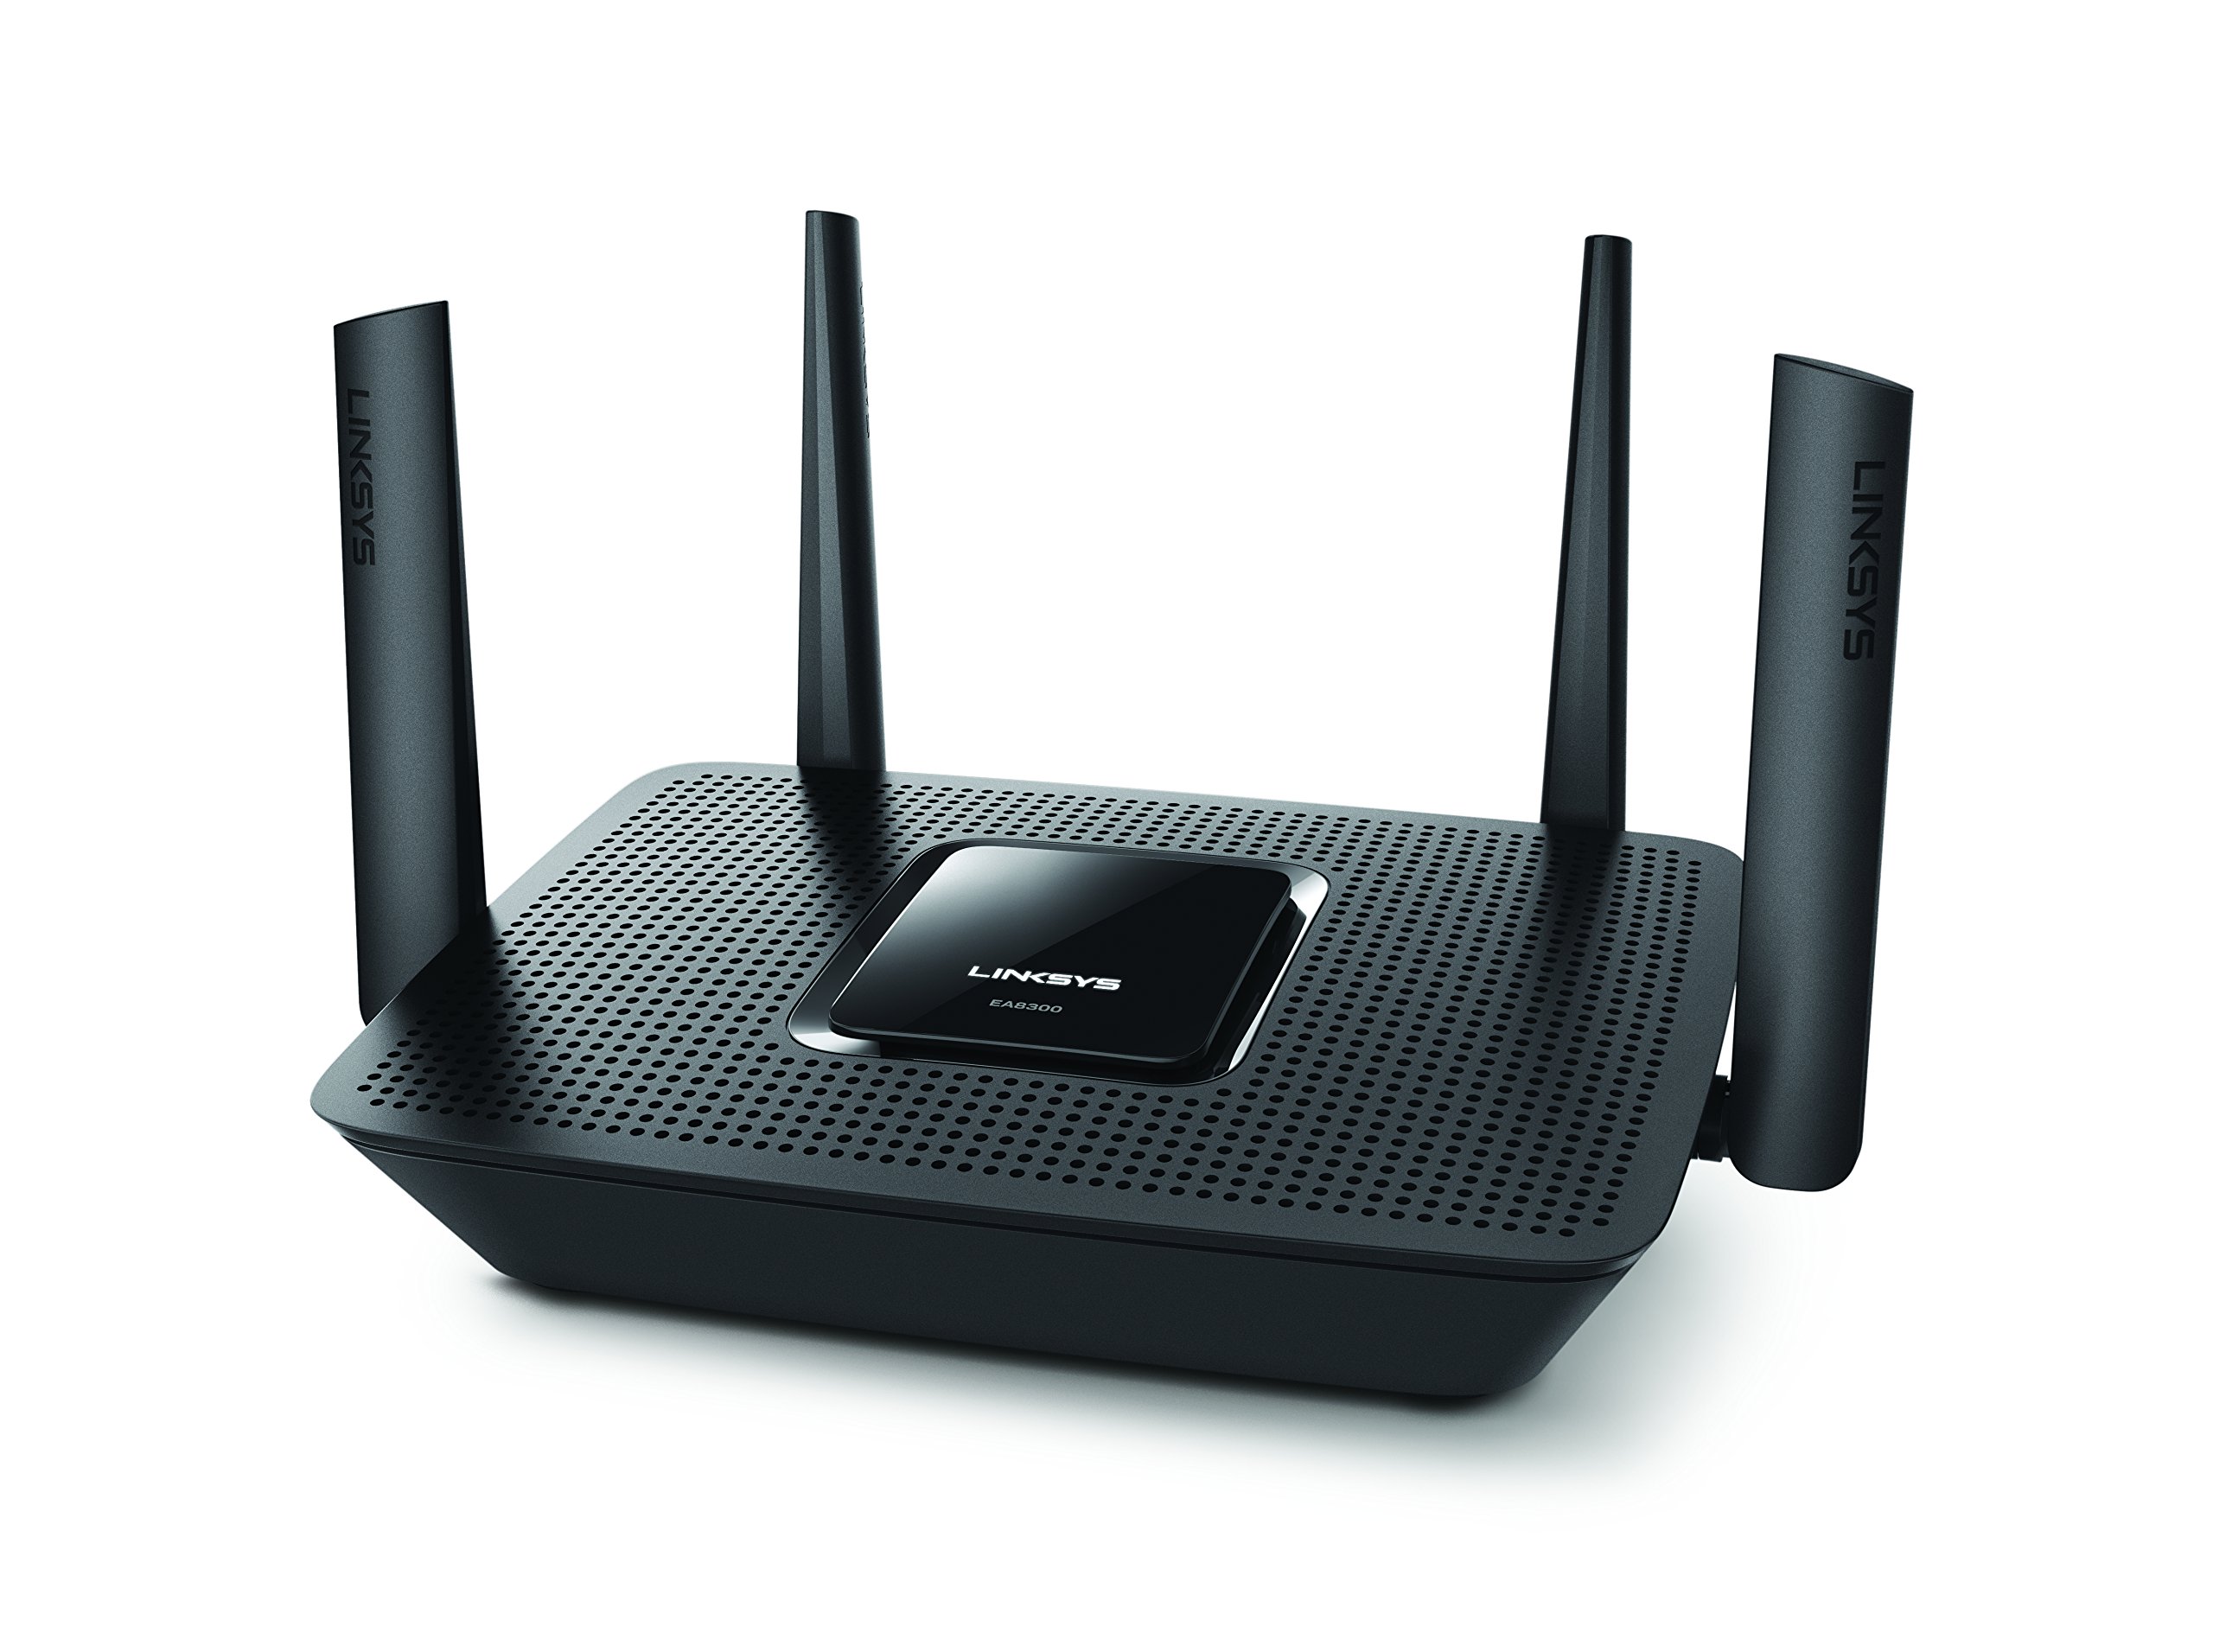 Linksys EA8300 Max-Stream: AC2200 Tri-Band Wi-Fi Router for Wireless Home Network, Uninterrupted Gaming and Streaming, MU-MIMO (Black) $69.99